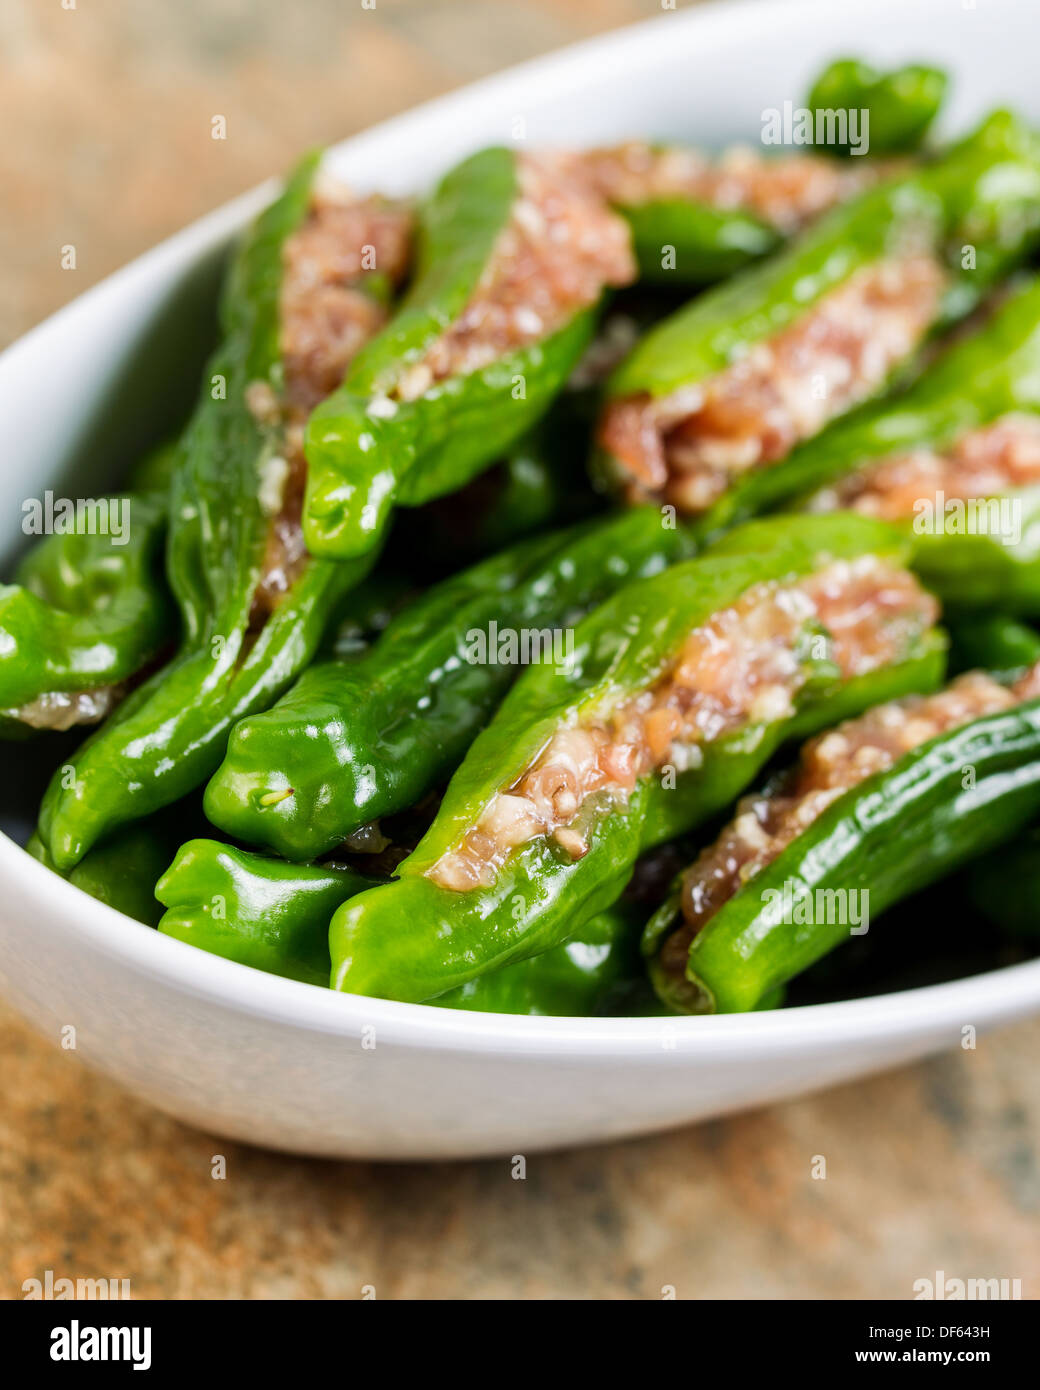 Closeup vertical photo of uncooked fresh, stuffed green sweet peppers, in white bowl, on stone counter top Stock Photo